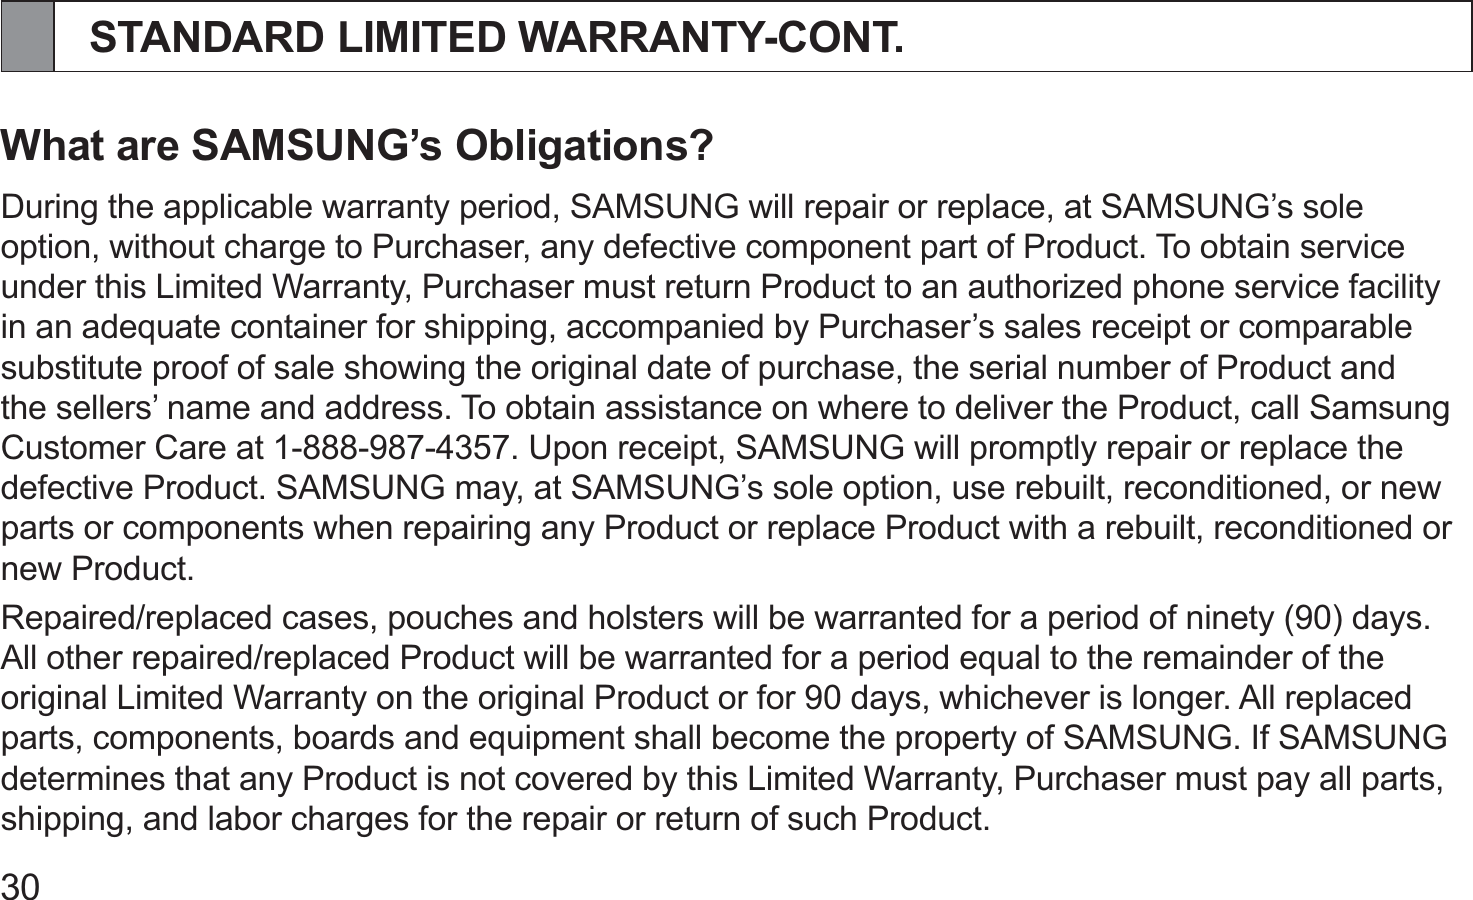 30STANDARD LIMITED WARRANTY-CONT.What are SAMSUNG’s Obligations?During the applicable warranty period, SAMSUNG will repair or replace, at SAMSUNG’s sole option, without charge to Purchaser, any defective component part of Product. To obtain service under this Limited Warranty, Purchaser must return Product to an authorized phone service facility in an adequate container for shipping, accompanied by Purchaser’s sales receipt or comparable substitute proof of sale showing the original date of purchase, the serial number of Product and the sellers’ name and address. To obtain assistance on where to deliver the Product, call Samsung Customer Care at 1-888-987-4357. Upon receipt, SAMSUNG will promptly repair or replace the defective Product. SAMSUNG may, at SAMSUNG’s sole option, use rebuilt, reconditioned, or new parts or components when repairing any Product or replace Product with a rebuilt, reconditioned or new Product.Repaired/replaced cases, pouches and holsters will be warranted for a period of ninety (90) days. All other repaired/replaced Product will be warranted for a period equal to the remainder of the original Limited Warranty on the original Product or for 90 days, whichever is longer. All replaced parts, components, boards and equipment shall become the property of SAMSUNG. If SAMSUNG determines that any Product is not covered by this Limited Warranty, Purchaser must pay all parts, shipping, and labor charges for the repair or return of such Product.